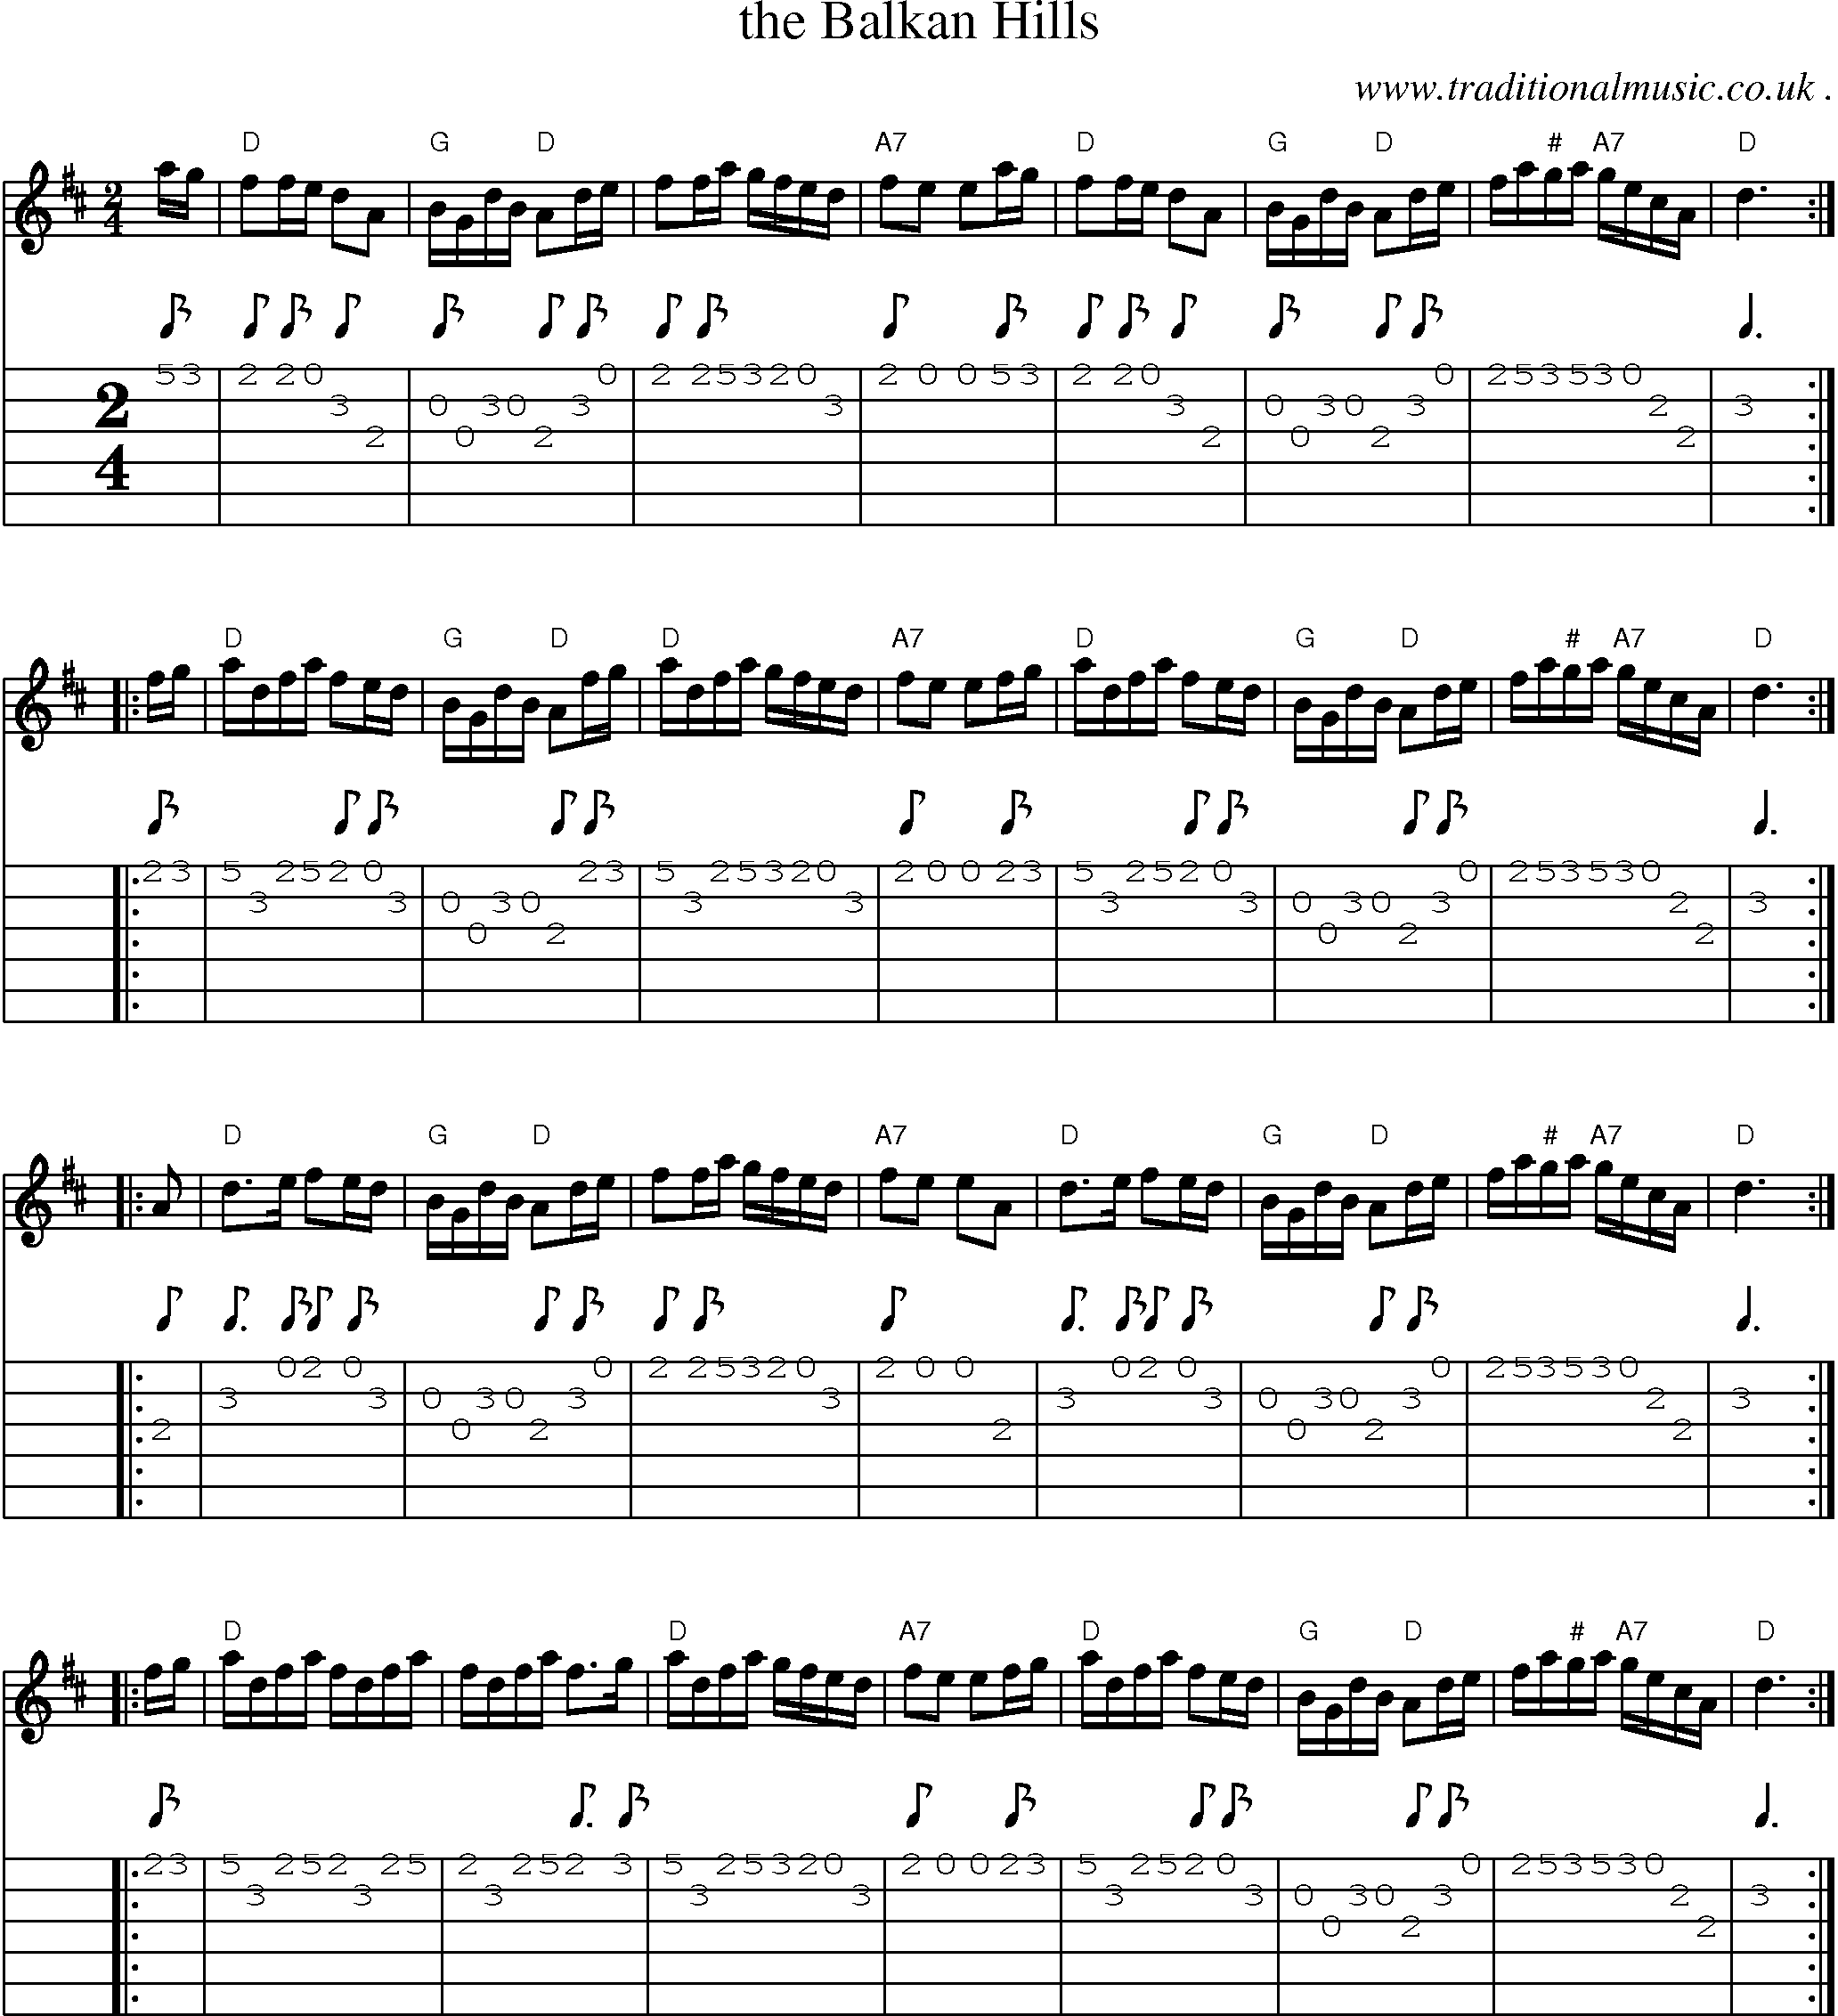 Sheet-music  score, Chords and Guitar Tabs for The Balkan Hills